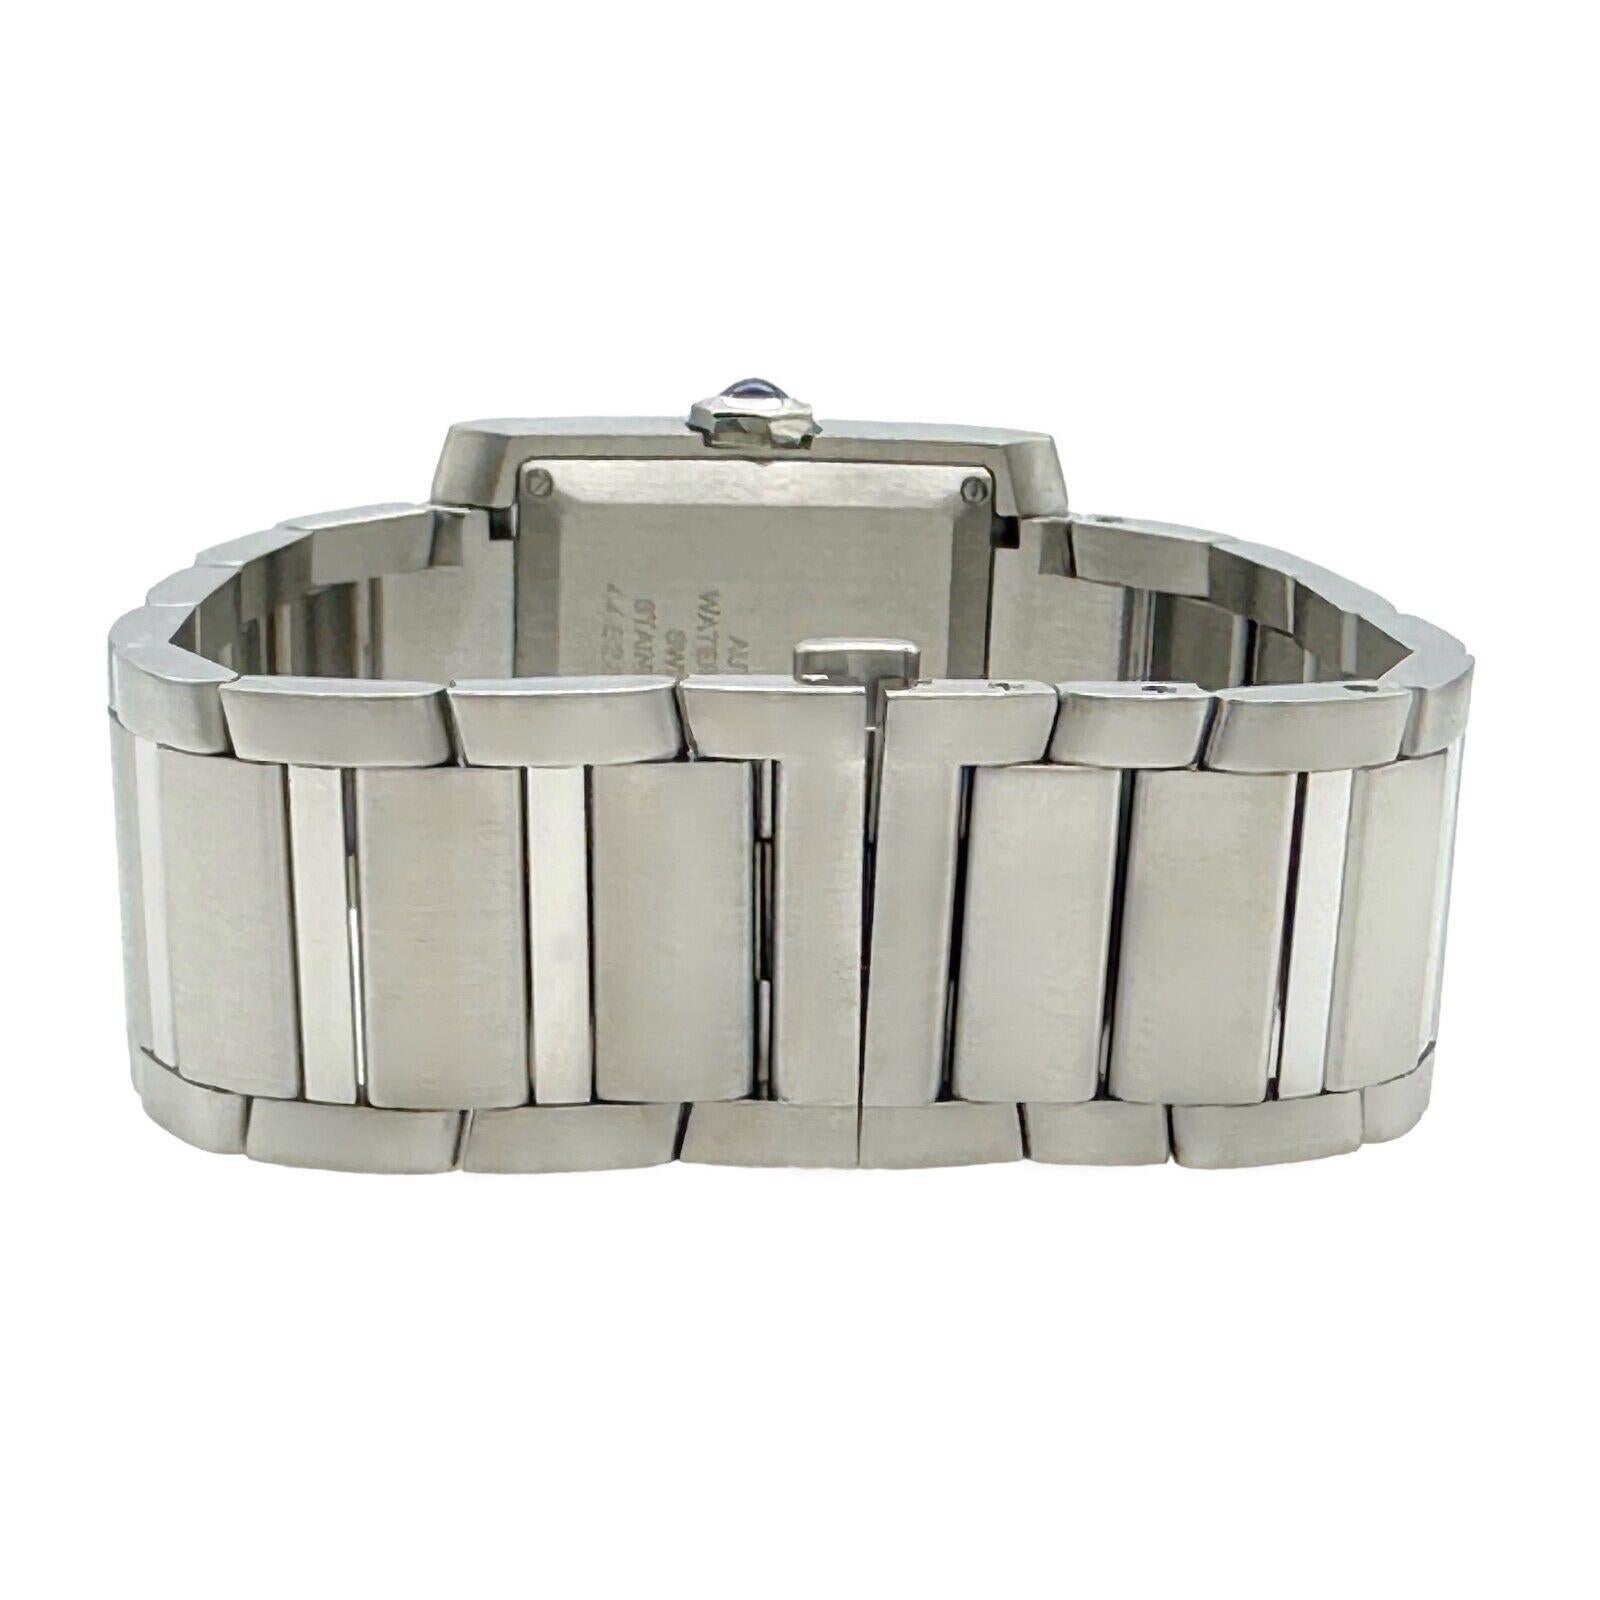 2023 Cartier Tank Francaise Large WSTA0067 Silver Roman Dial Stainless Steel For Sale 4